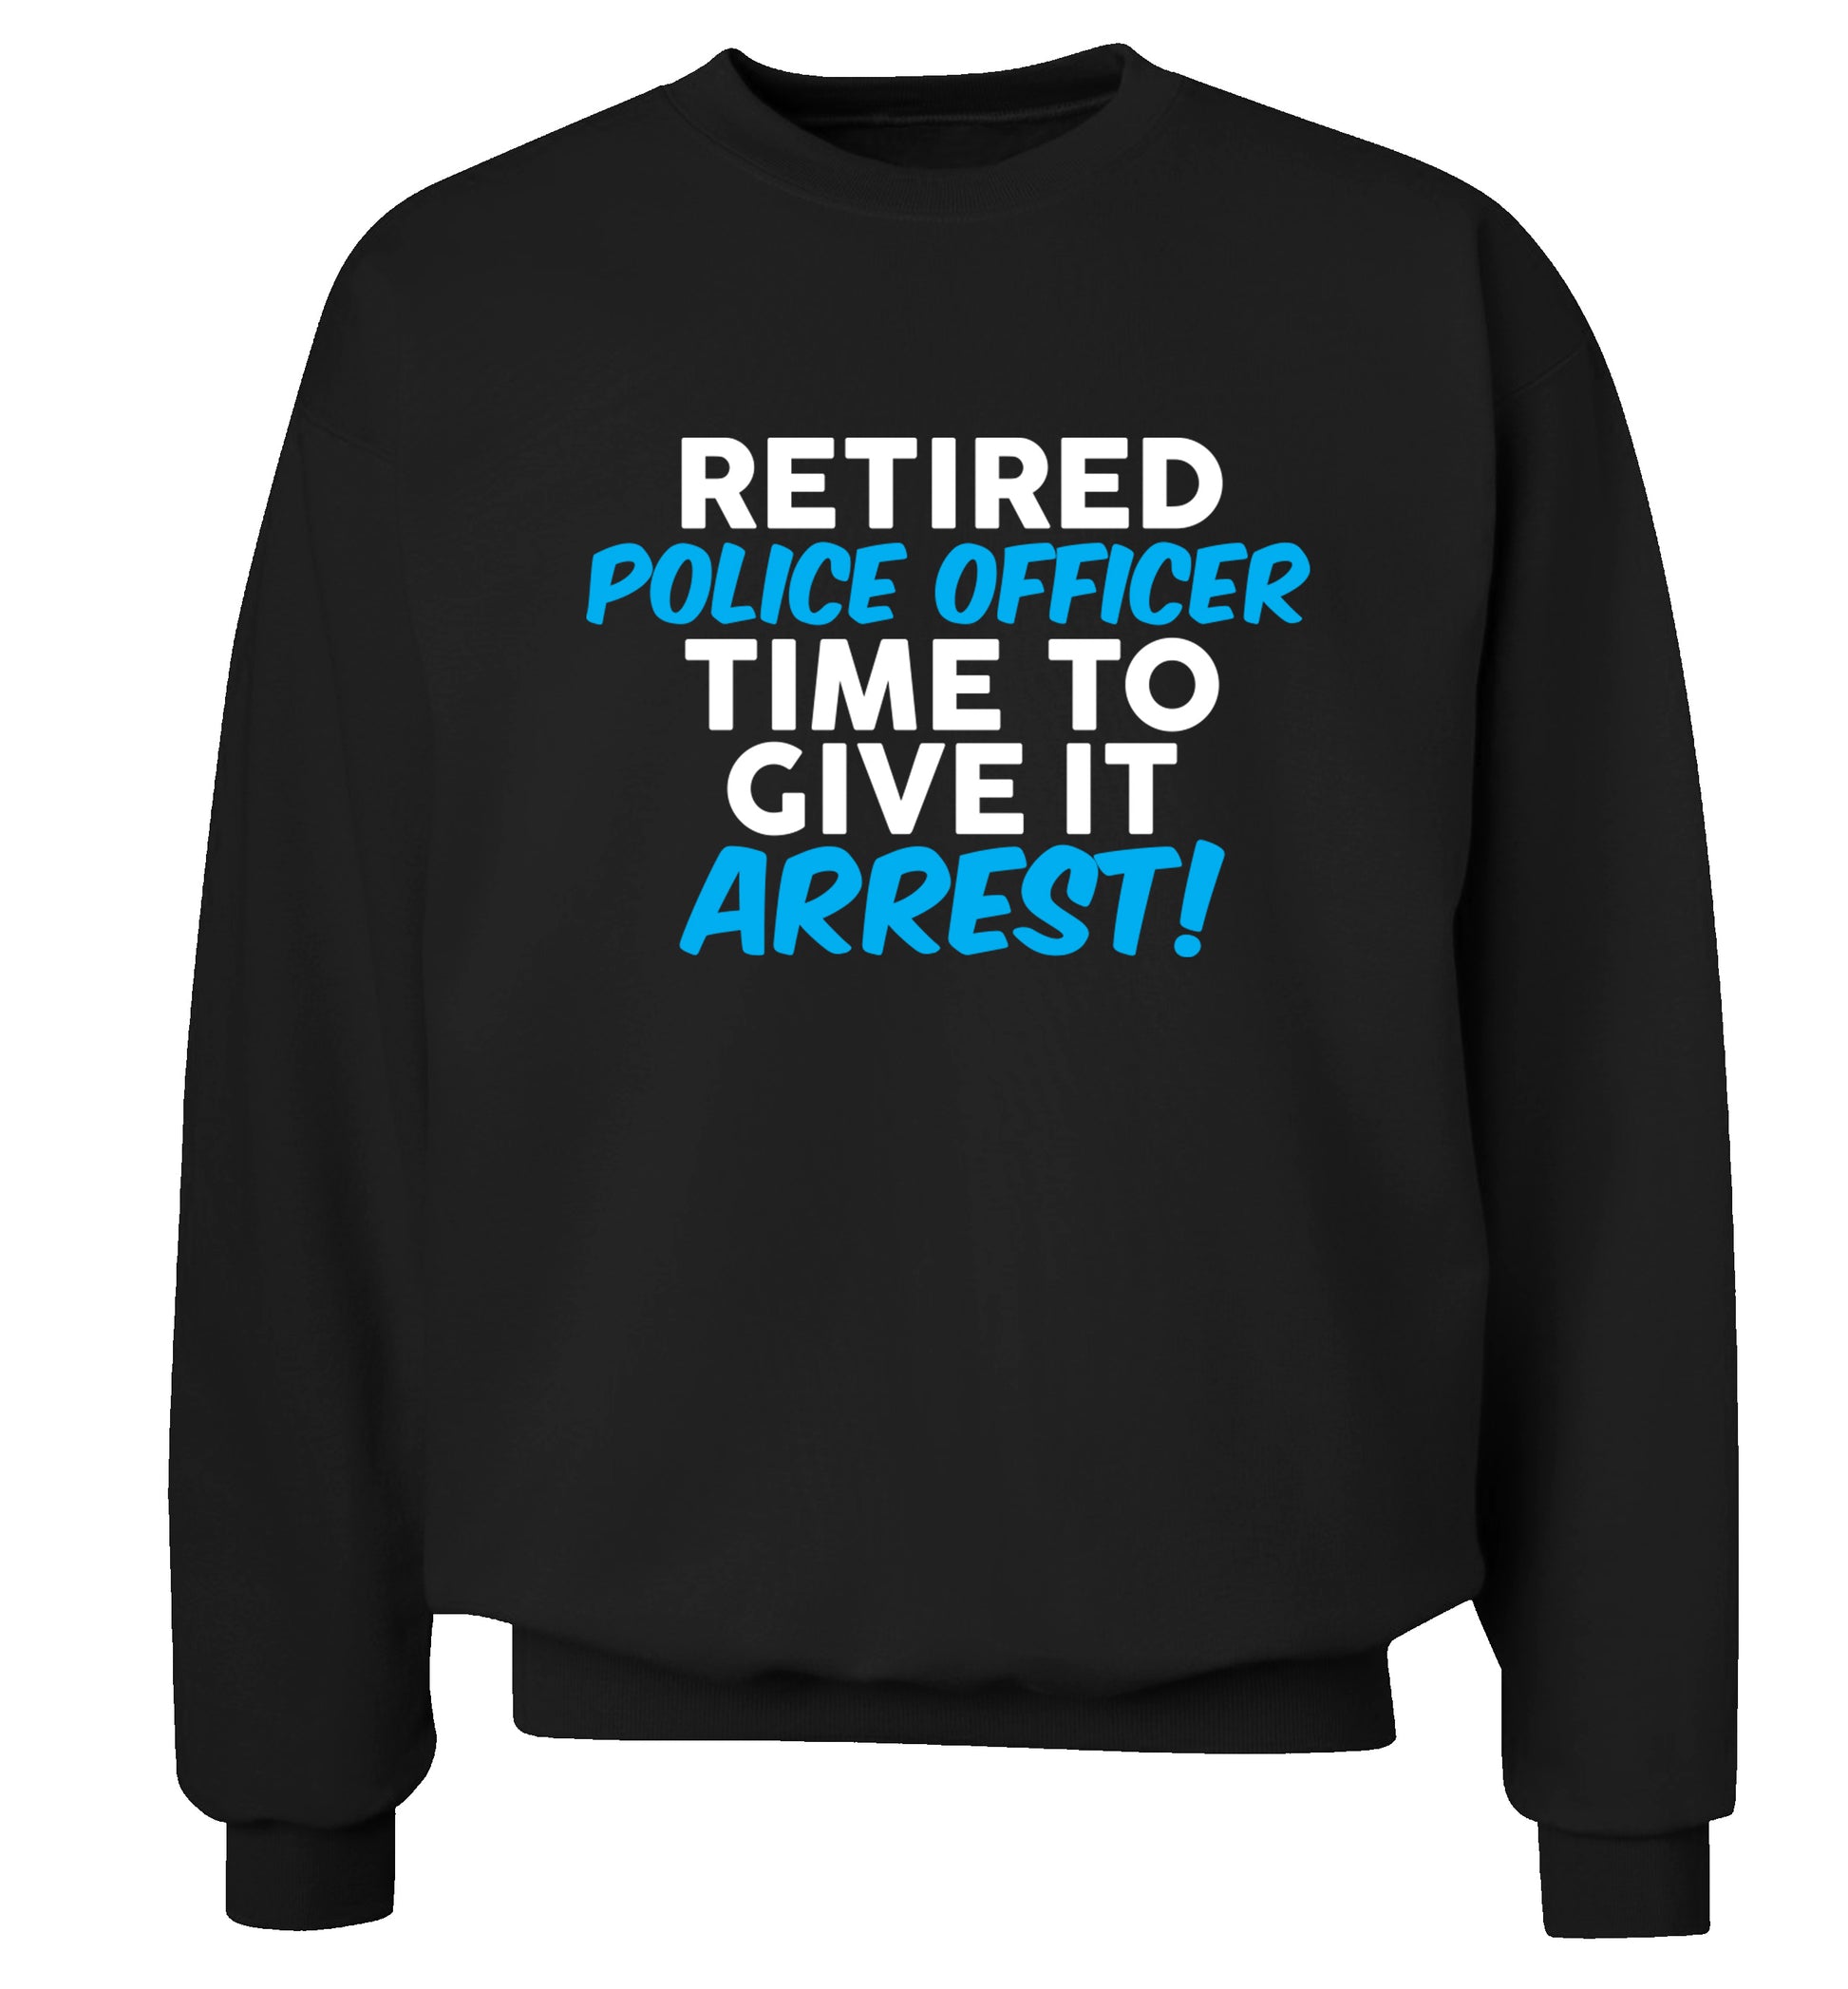 Retired police officer time to give it arrest Adult's unisex black Sweater 2XL